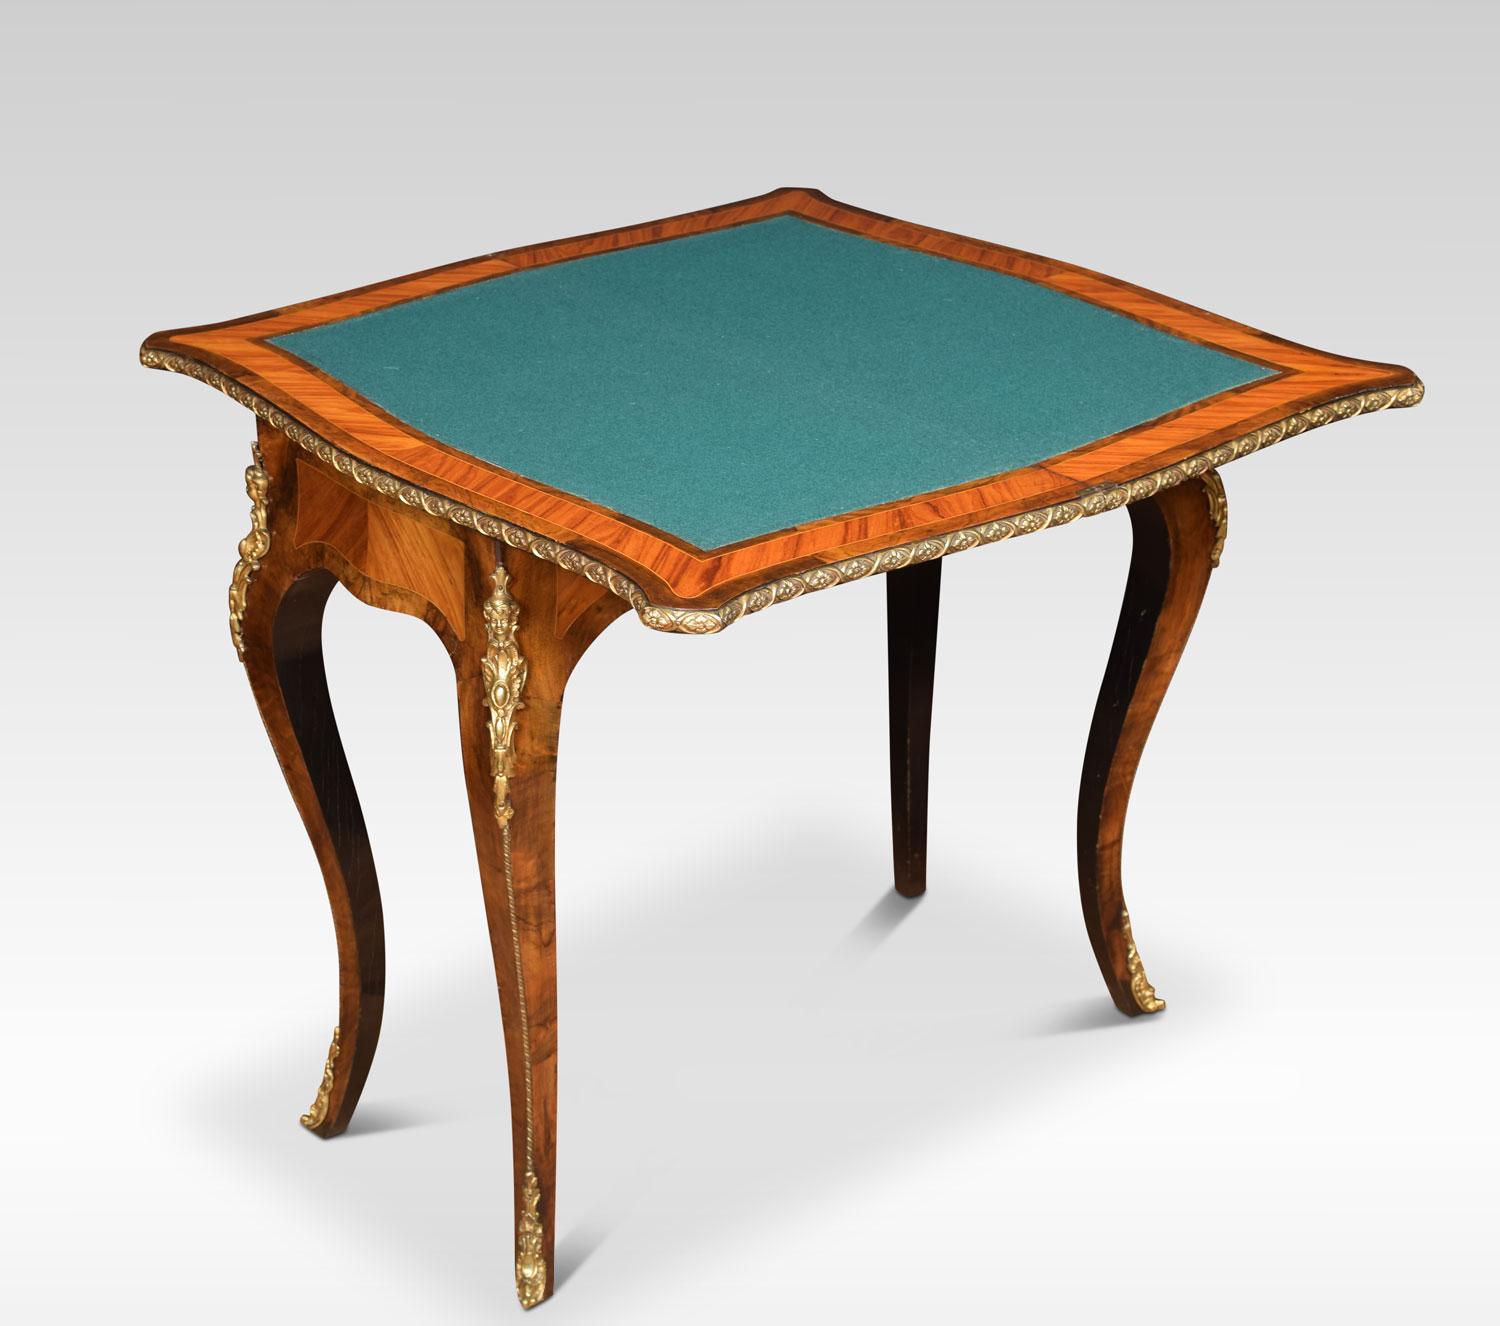 19th century burr walnut and kingwood card table, the serpentine inlaid floral top with bronze metal banded border opening to reveal baize interior and kingwood banded edge, all raised up on four slender cabriole supports, terminating in scrolling